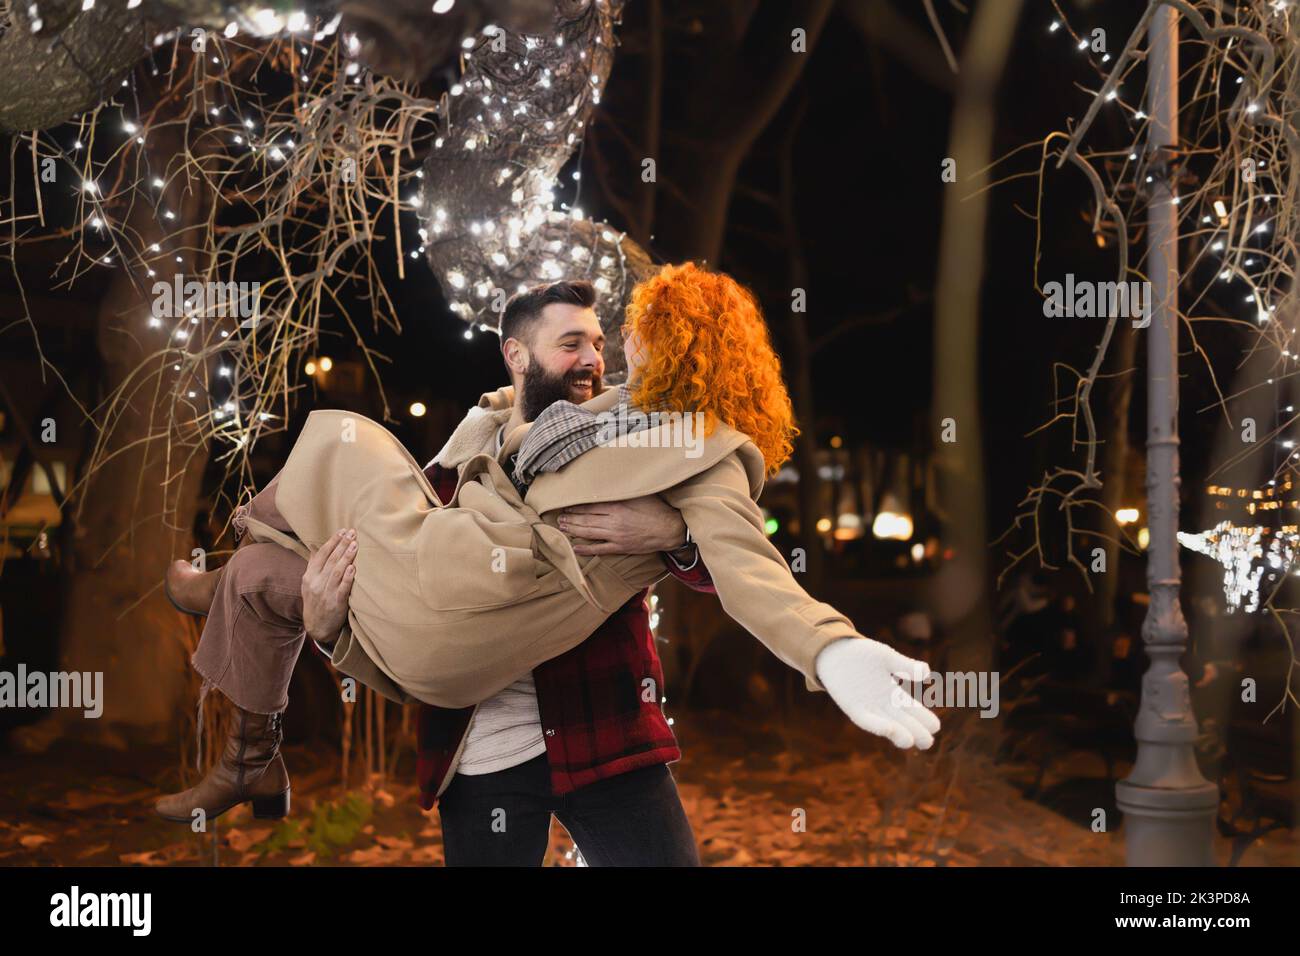 A man carries his wife on a beautiful winter night Stock Photo